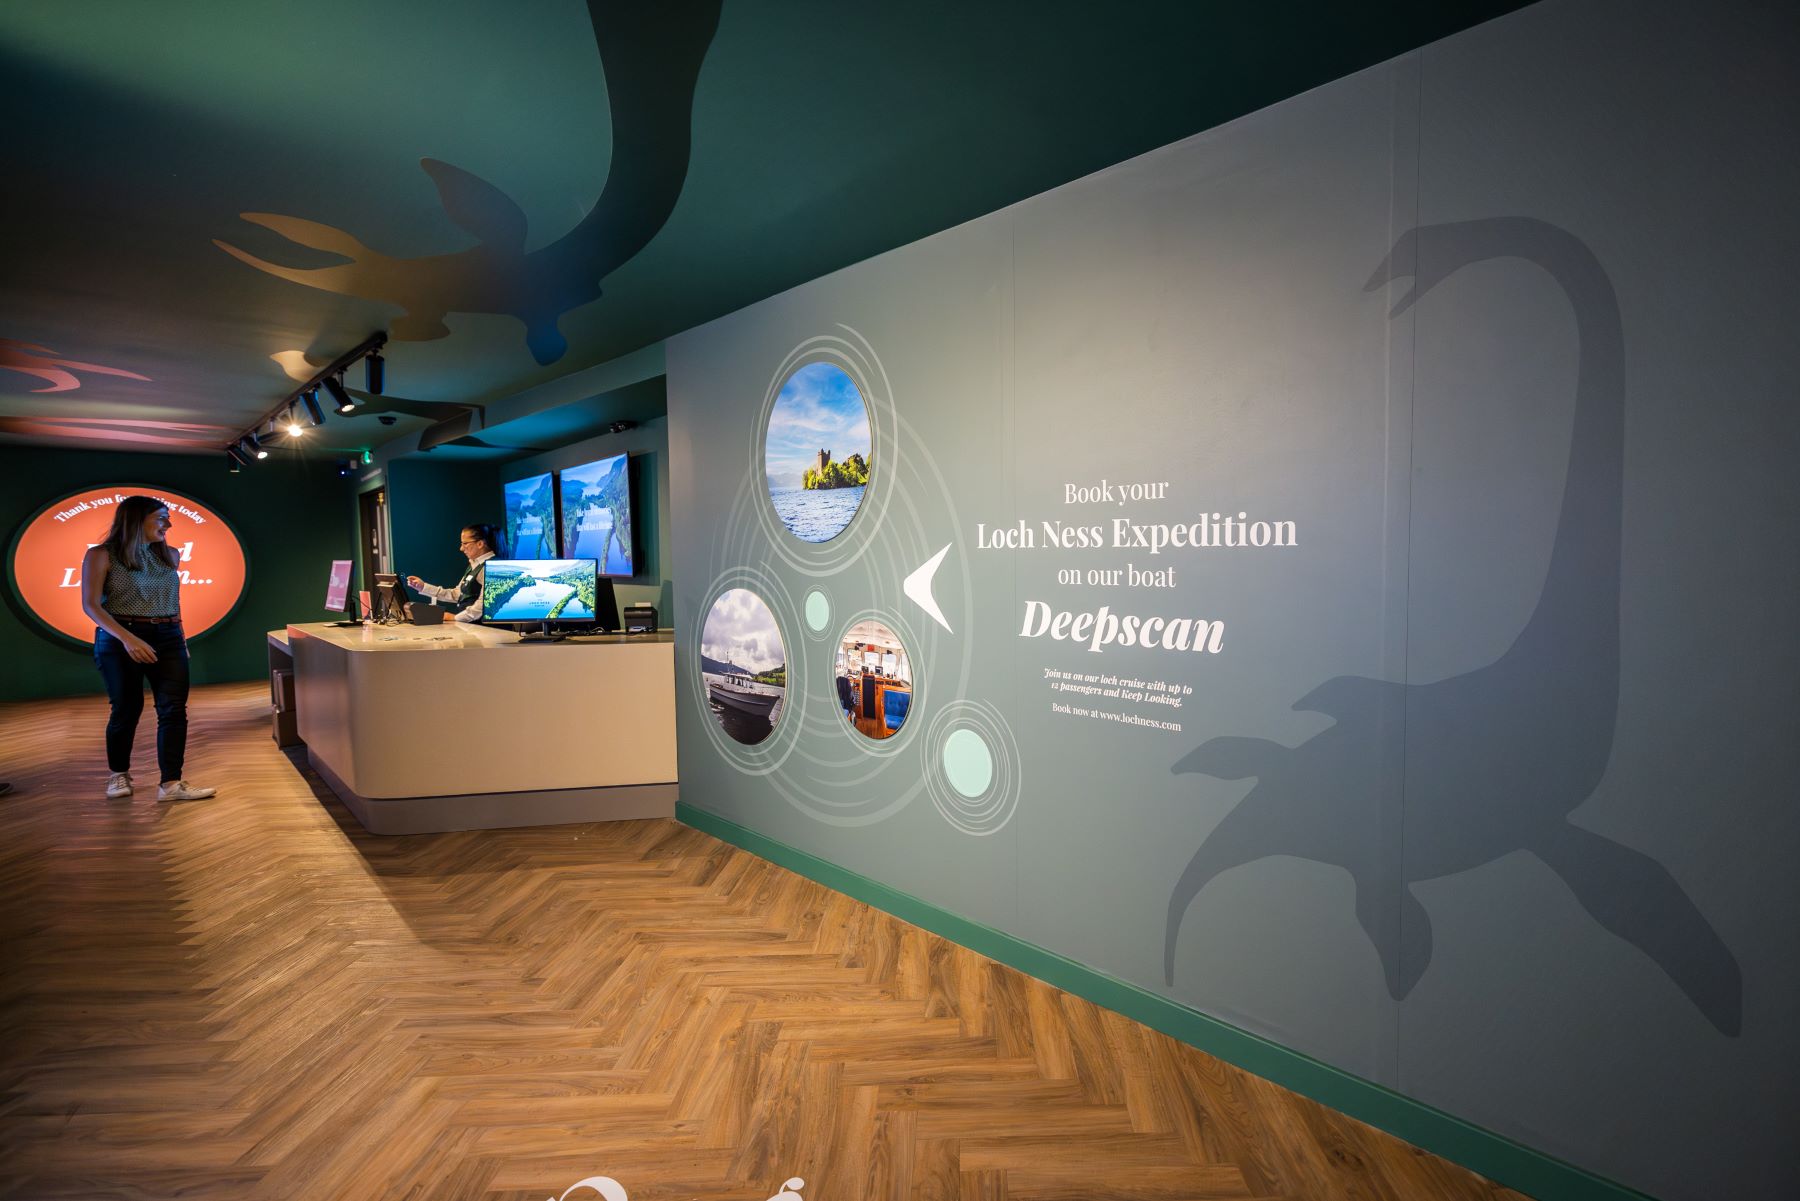 The Loch Ness Centre is continuing it's Quest in the search for Nessie